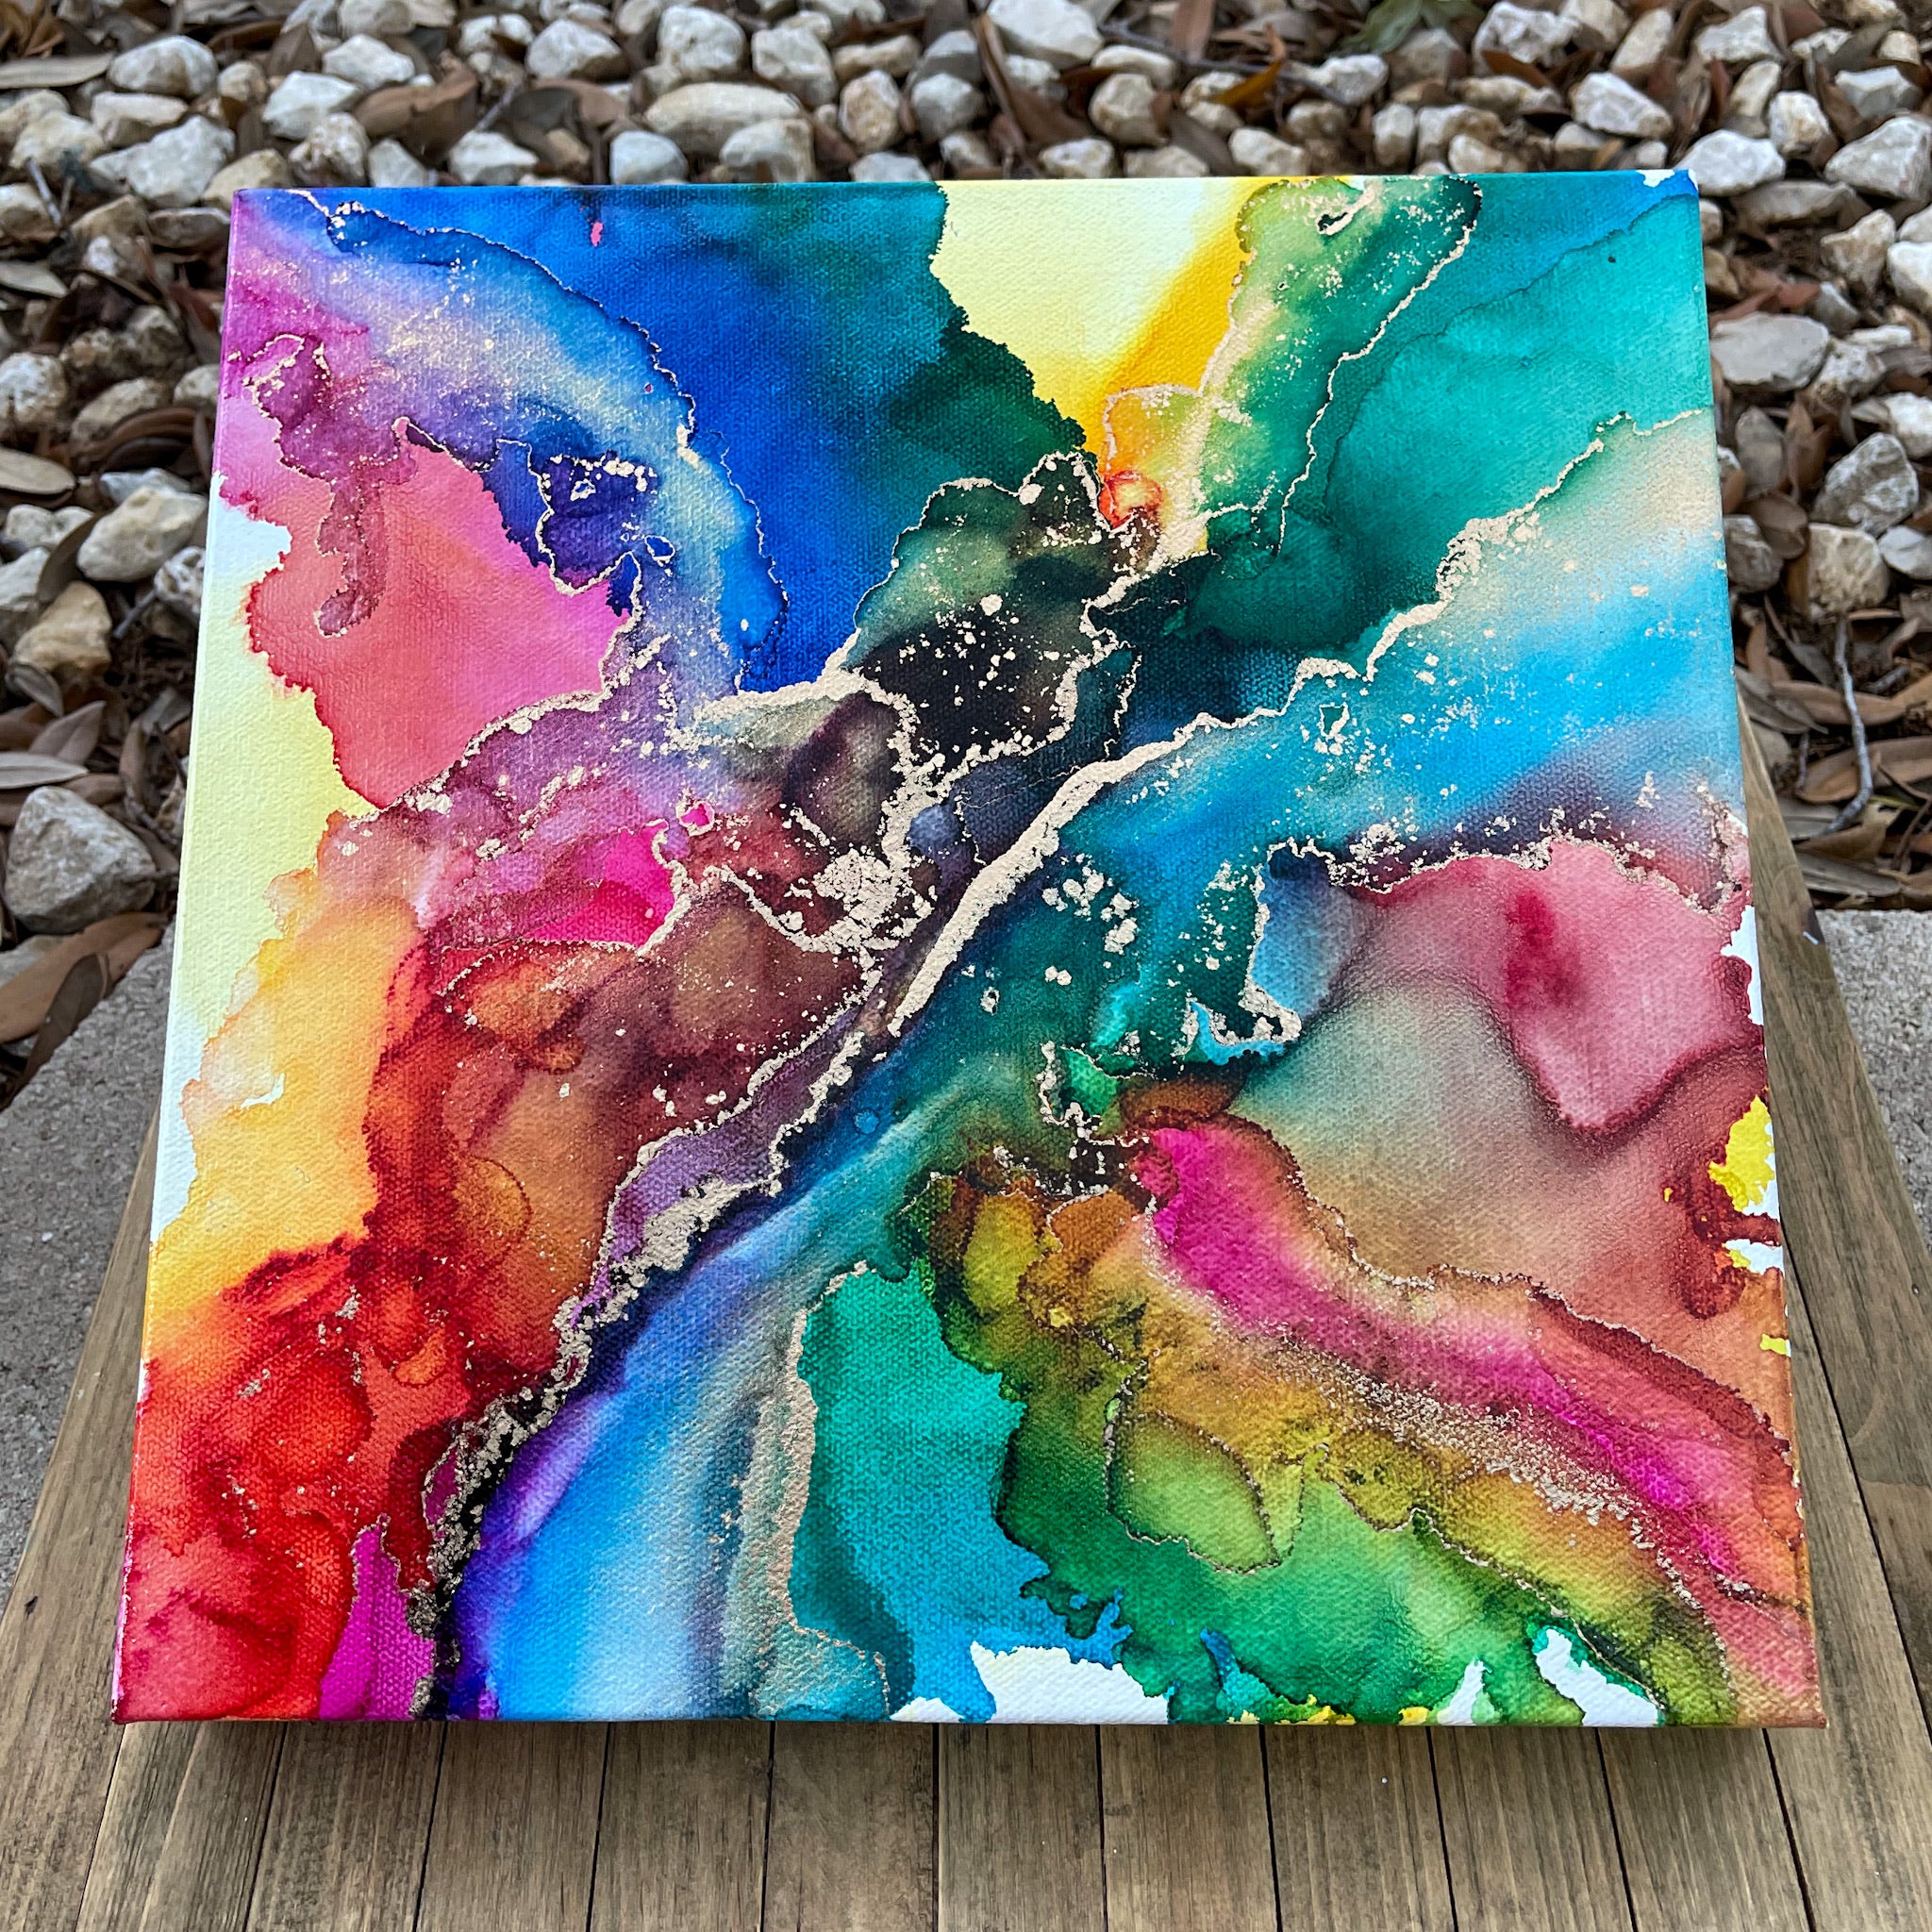 Alcohol Ink Painting on Canvas: Golden Yellow, Snapdragon Pink & Cobal –  Sassy Since Birth